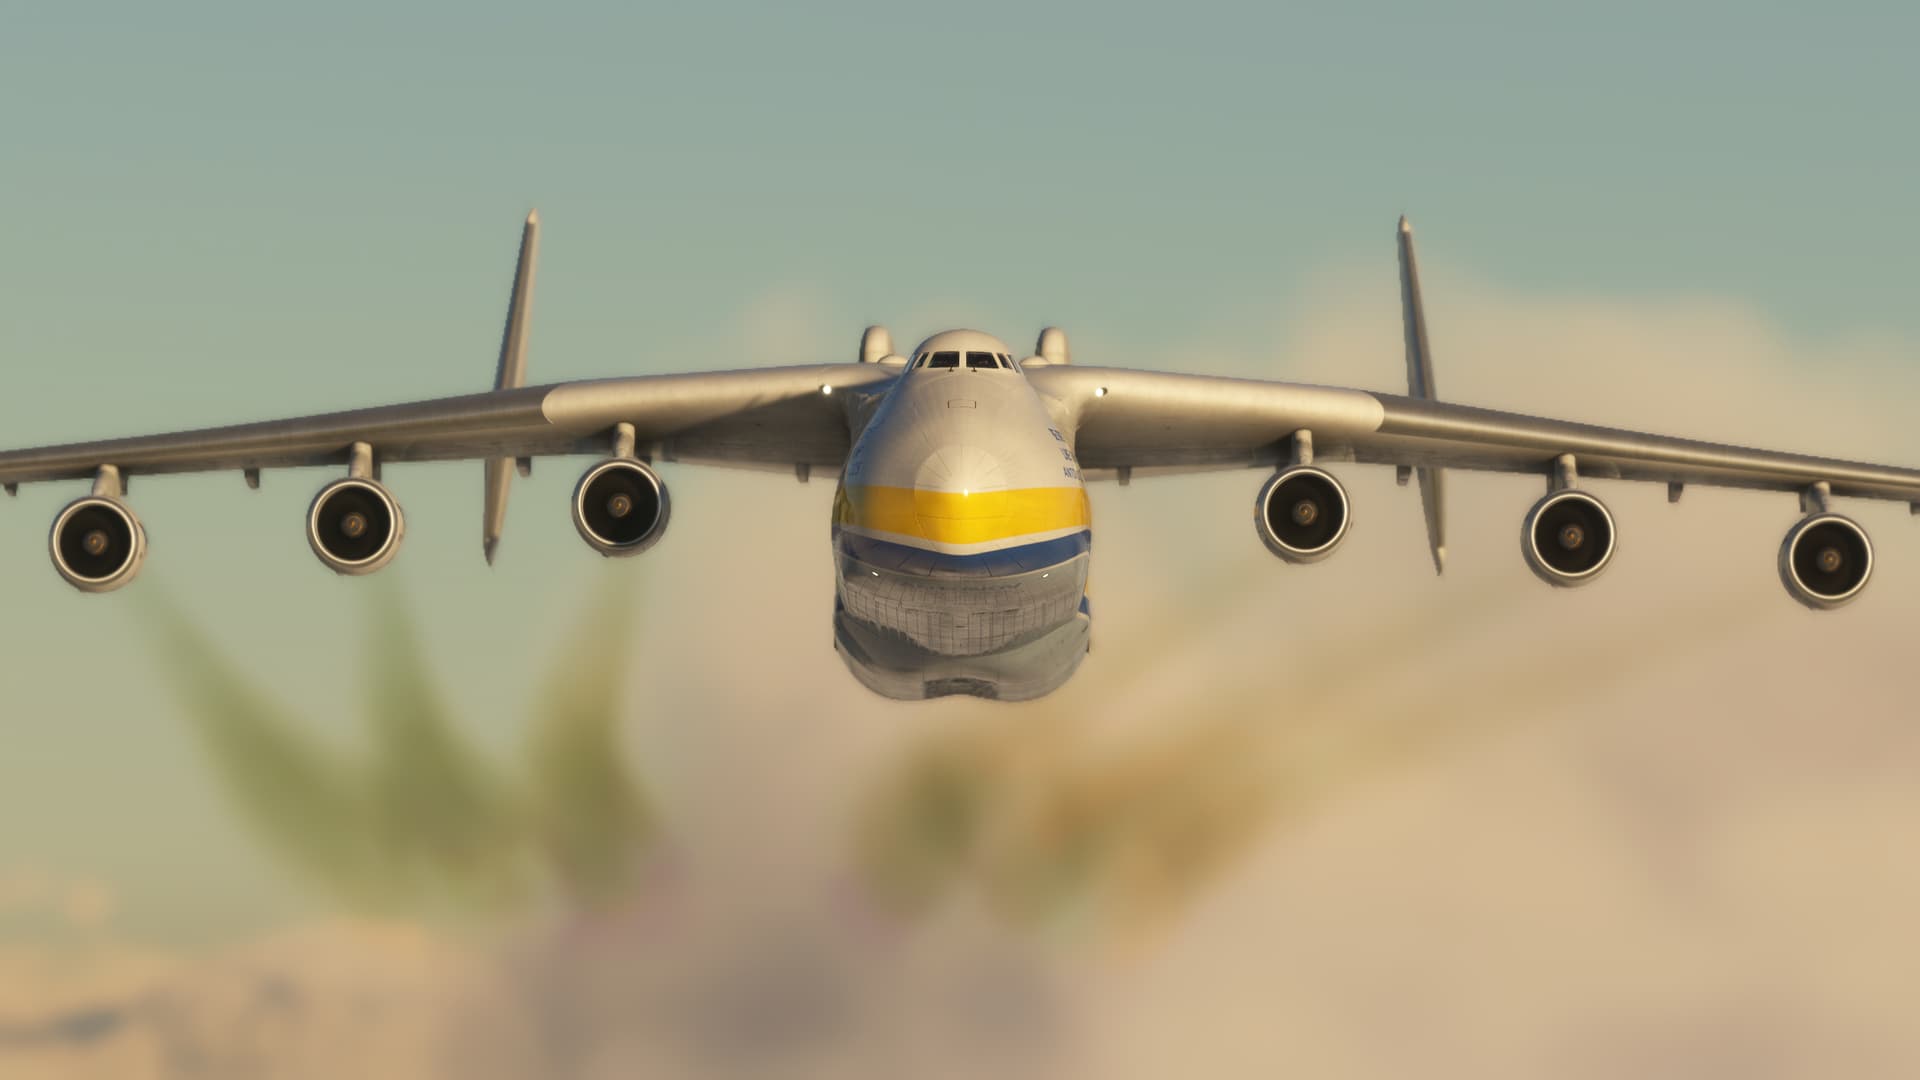 Flying world's largest aircraft An-225 Mriya now available in Microsoft  Flight Simulator - We Are Ukraine